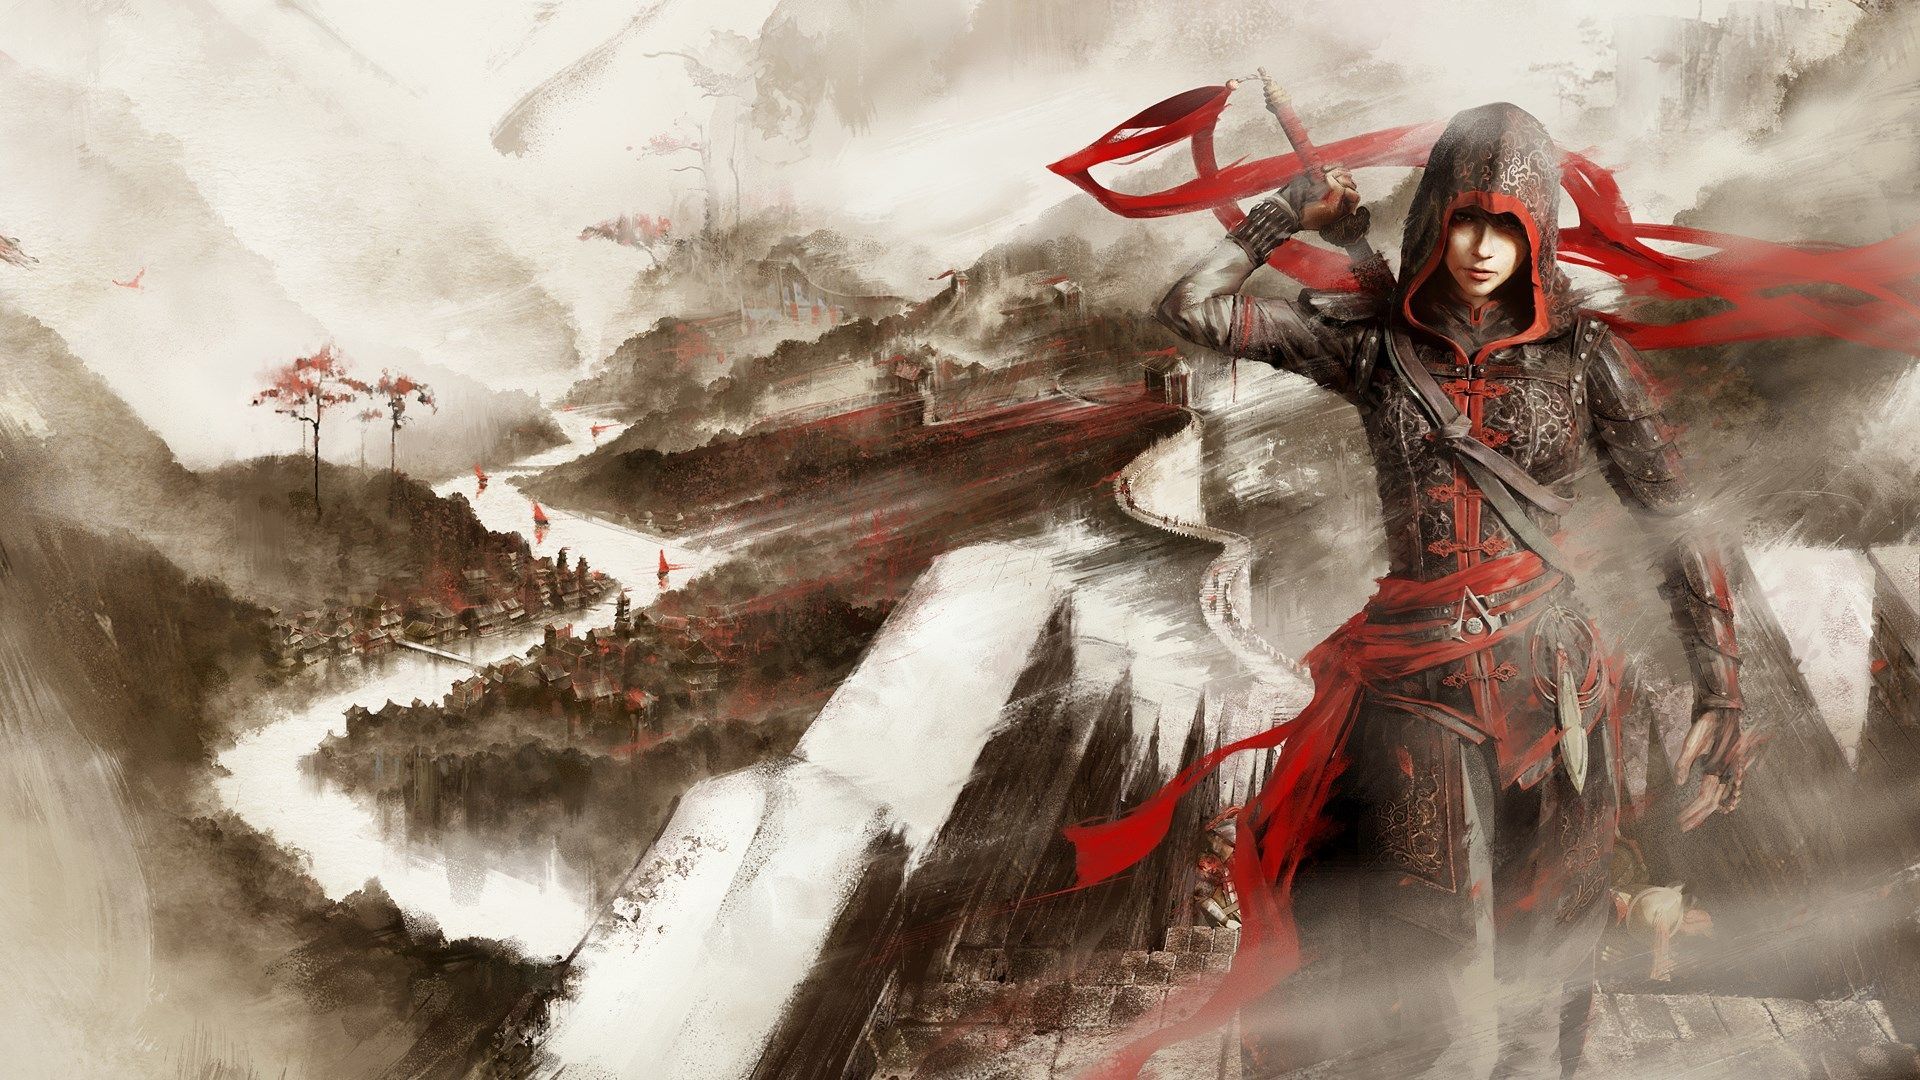 Assassins Creed: Chronicles game wallpaper. Assassin's creed chronicles, Assassins creed, Assassin s creed unity